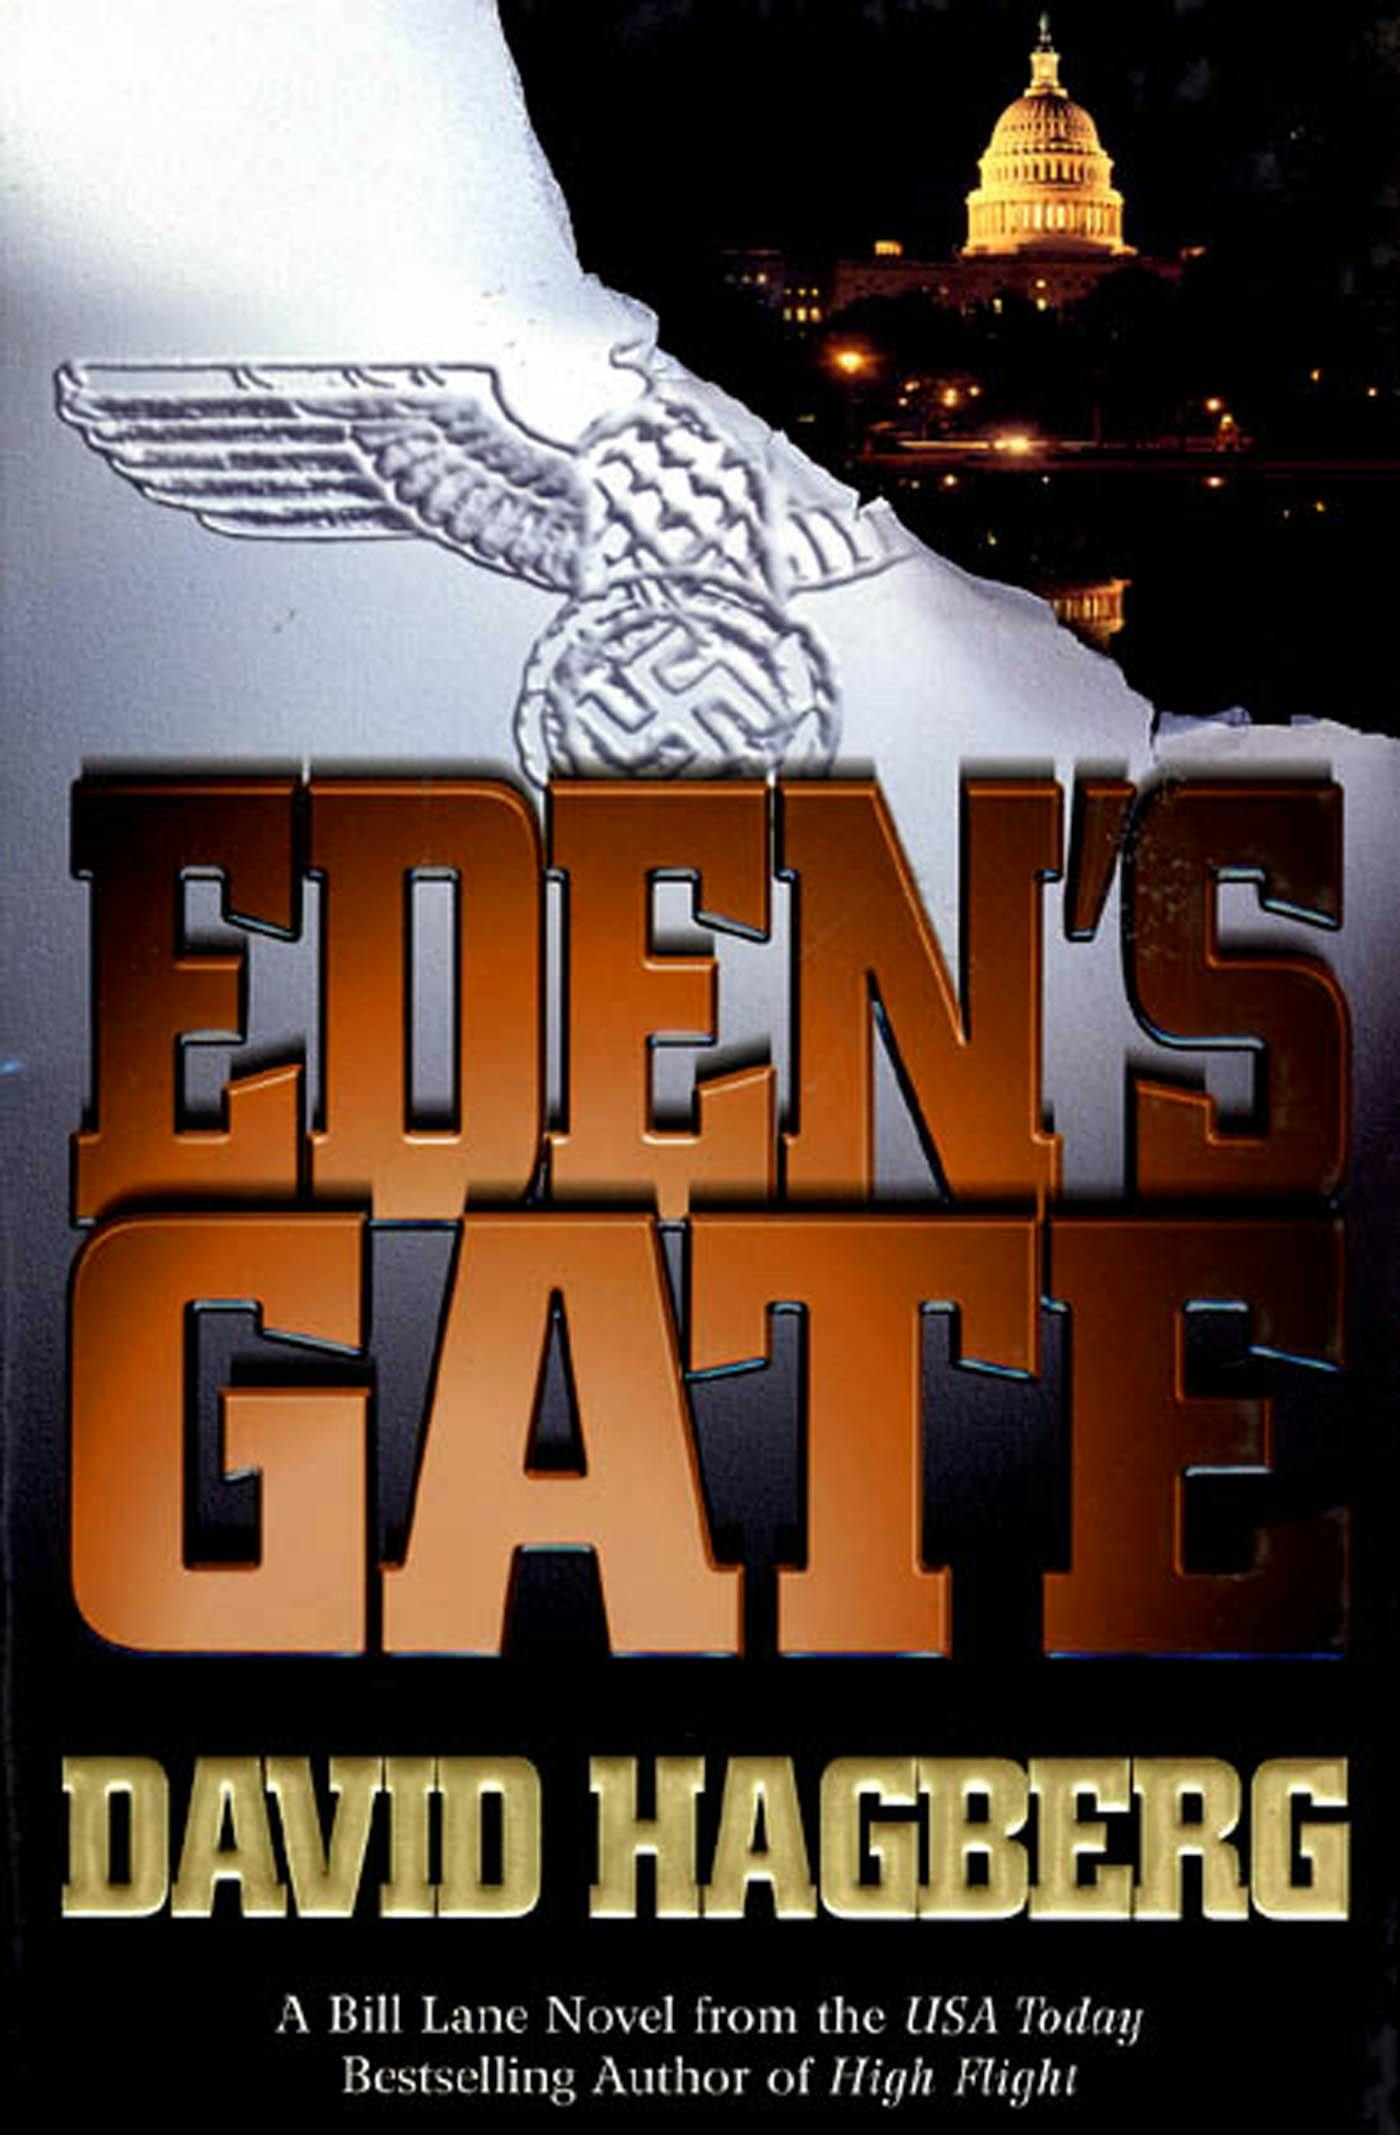 Cover for the book titled as: Eden's Gate